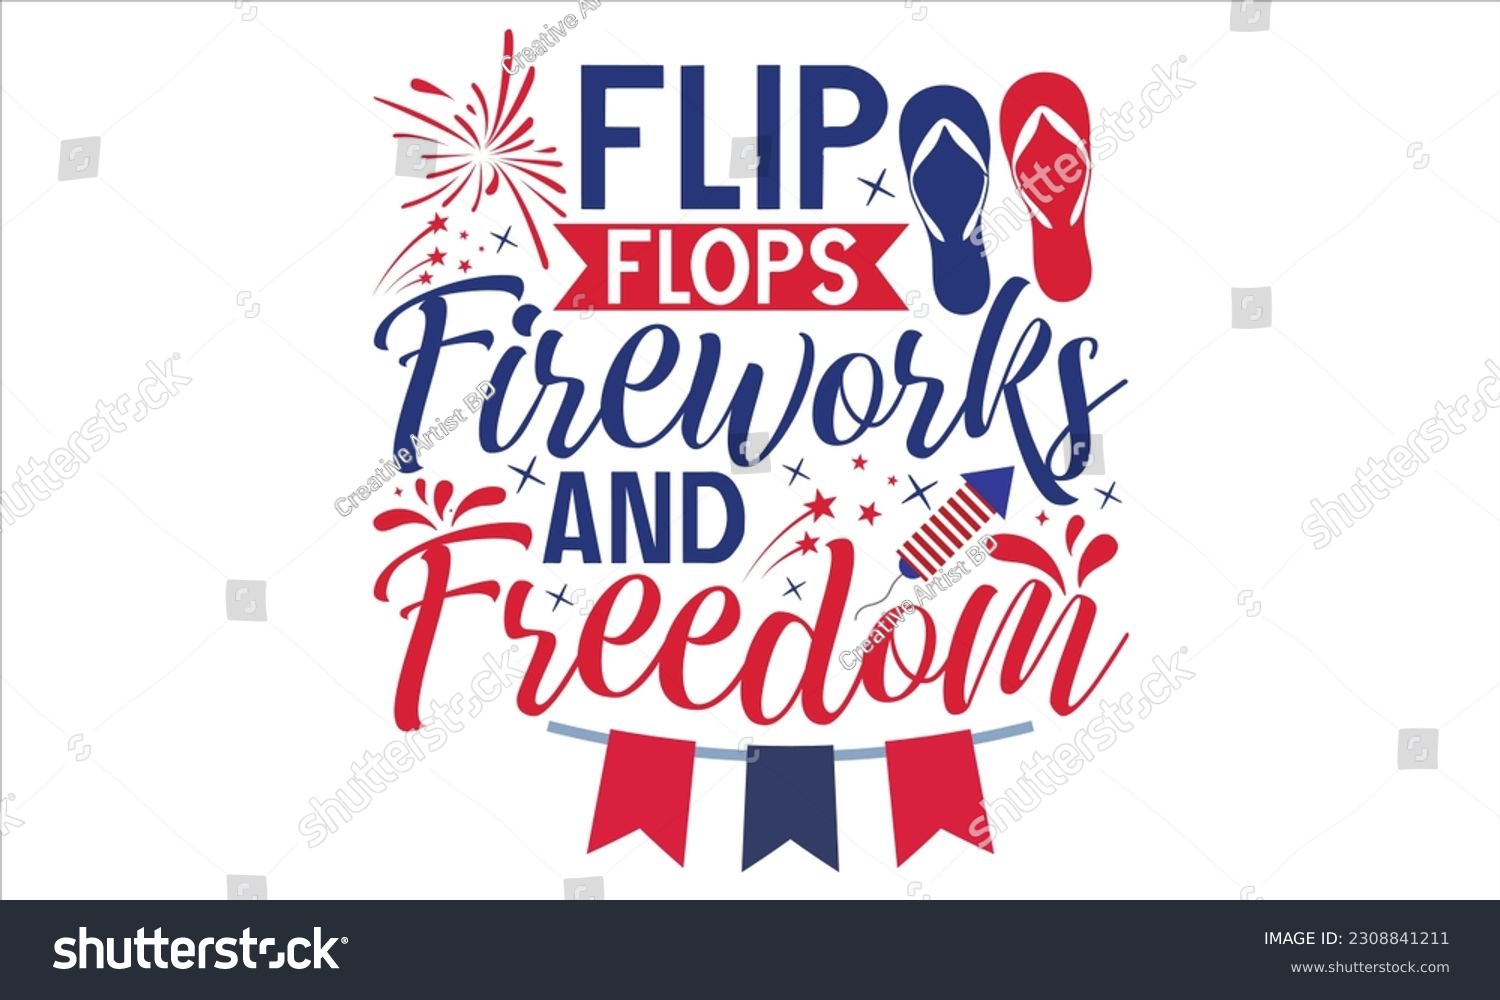 SVG of Flip Flops Fireworks And Freedom - Fourth Of July SVG Design, Hand drawn vintage illustration with lettering and decoration elements, prints for posters, banners, notebook covers with white background svg